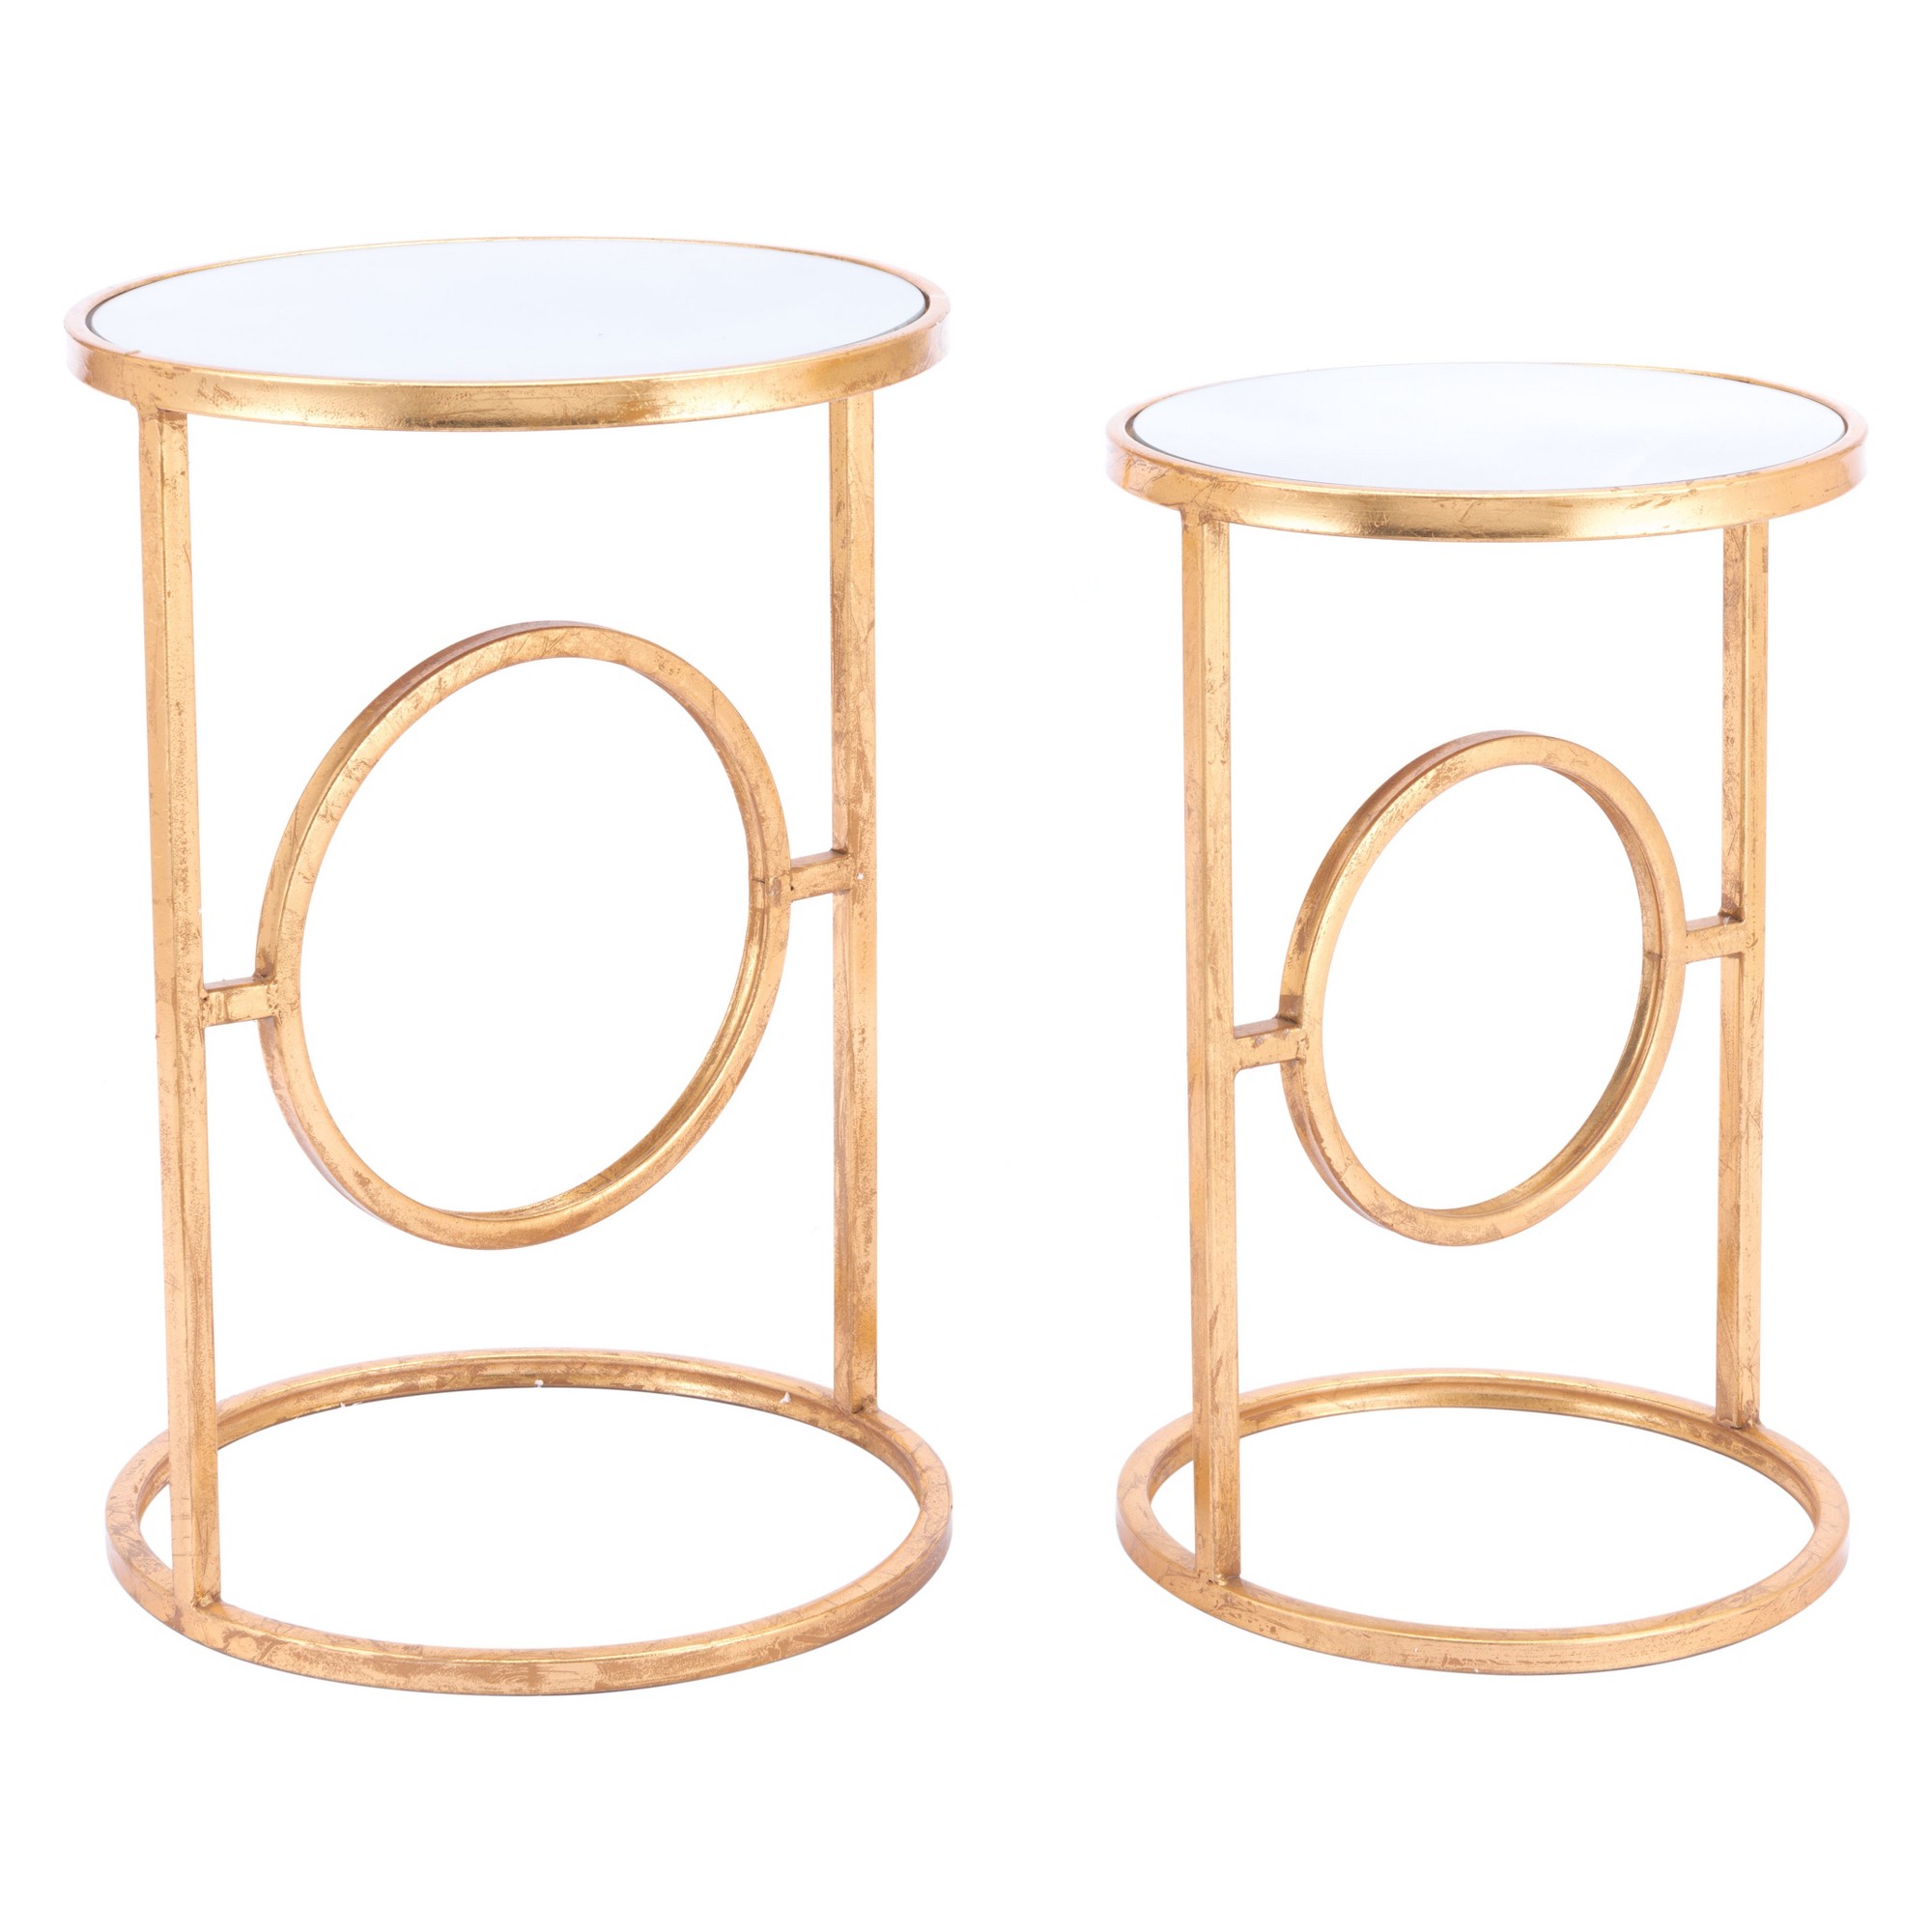 luxe steel mirror accent tables set gold home table best nightstands lawn and garden furniture drawer bedside white nesting living room blue lamp black solid wood coffee round